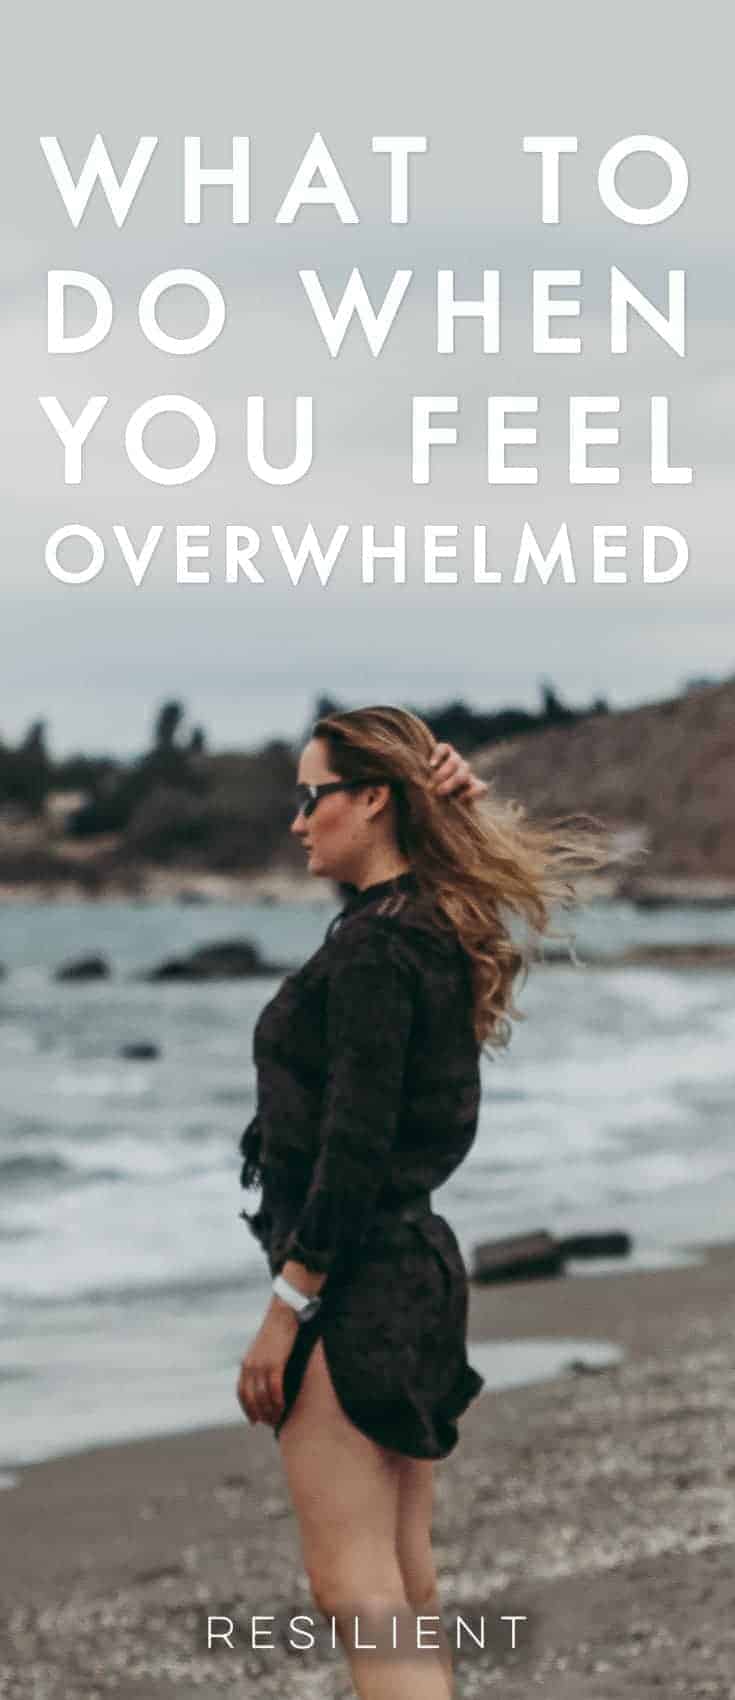 Sometimes life overwhelms us and the hits just keep coming.  I found myself in this position one time a few years ago.  Things kept going wrong, I'd break something on my website or business, and I made mistake after mistake after frustrating mistake.  Here's what to do when you feel overwhelmed.